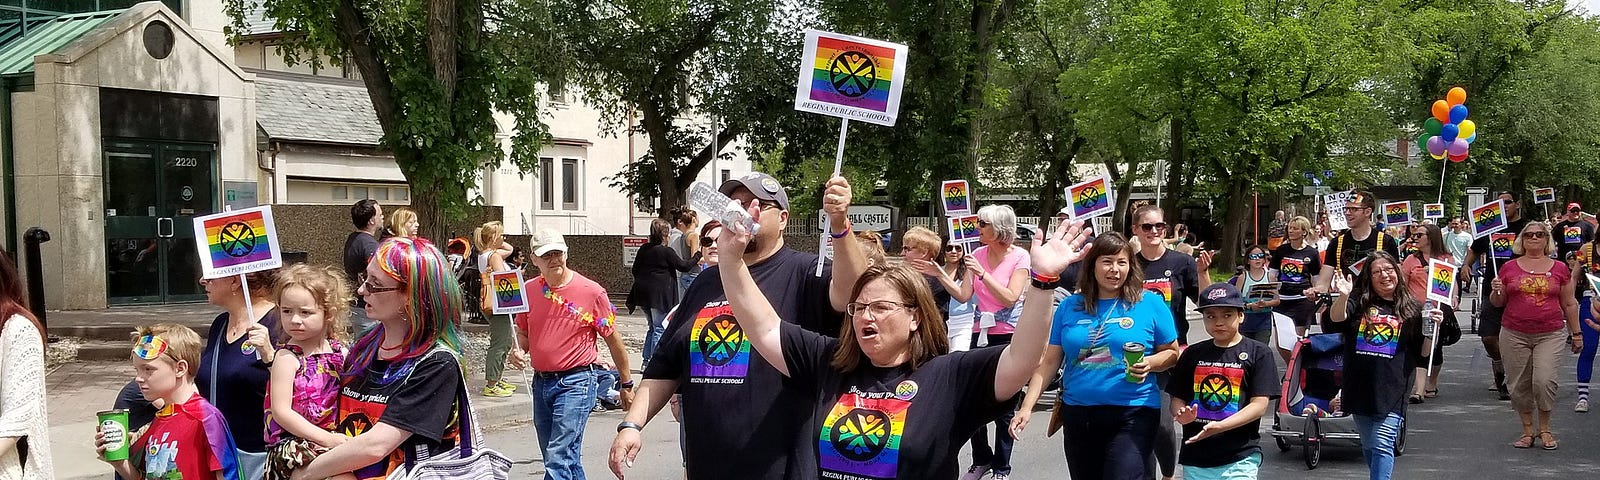 A group of school staff and children march in a Pride parade. Most are wearing black shirts with rainbow logos and some are carrying rainbow signs. One adult has rainbow-dyed hair and is carrying a small child wearing a rainbow tutu.